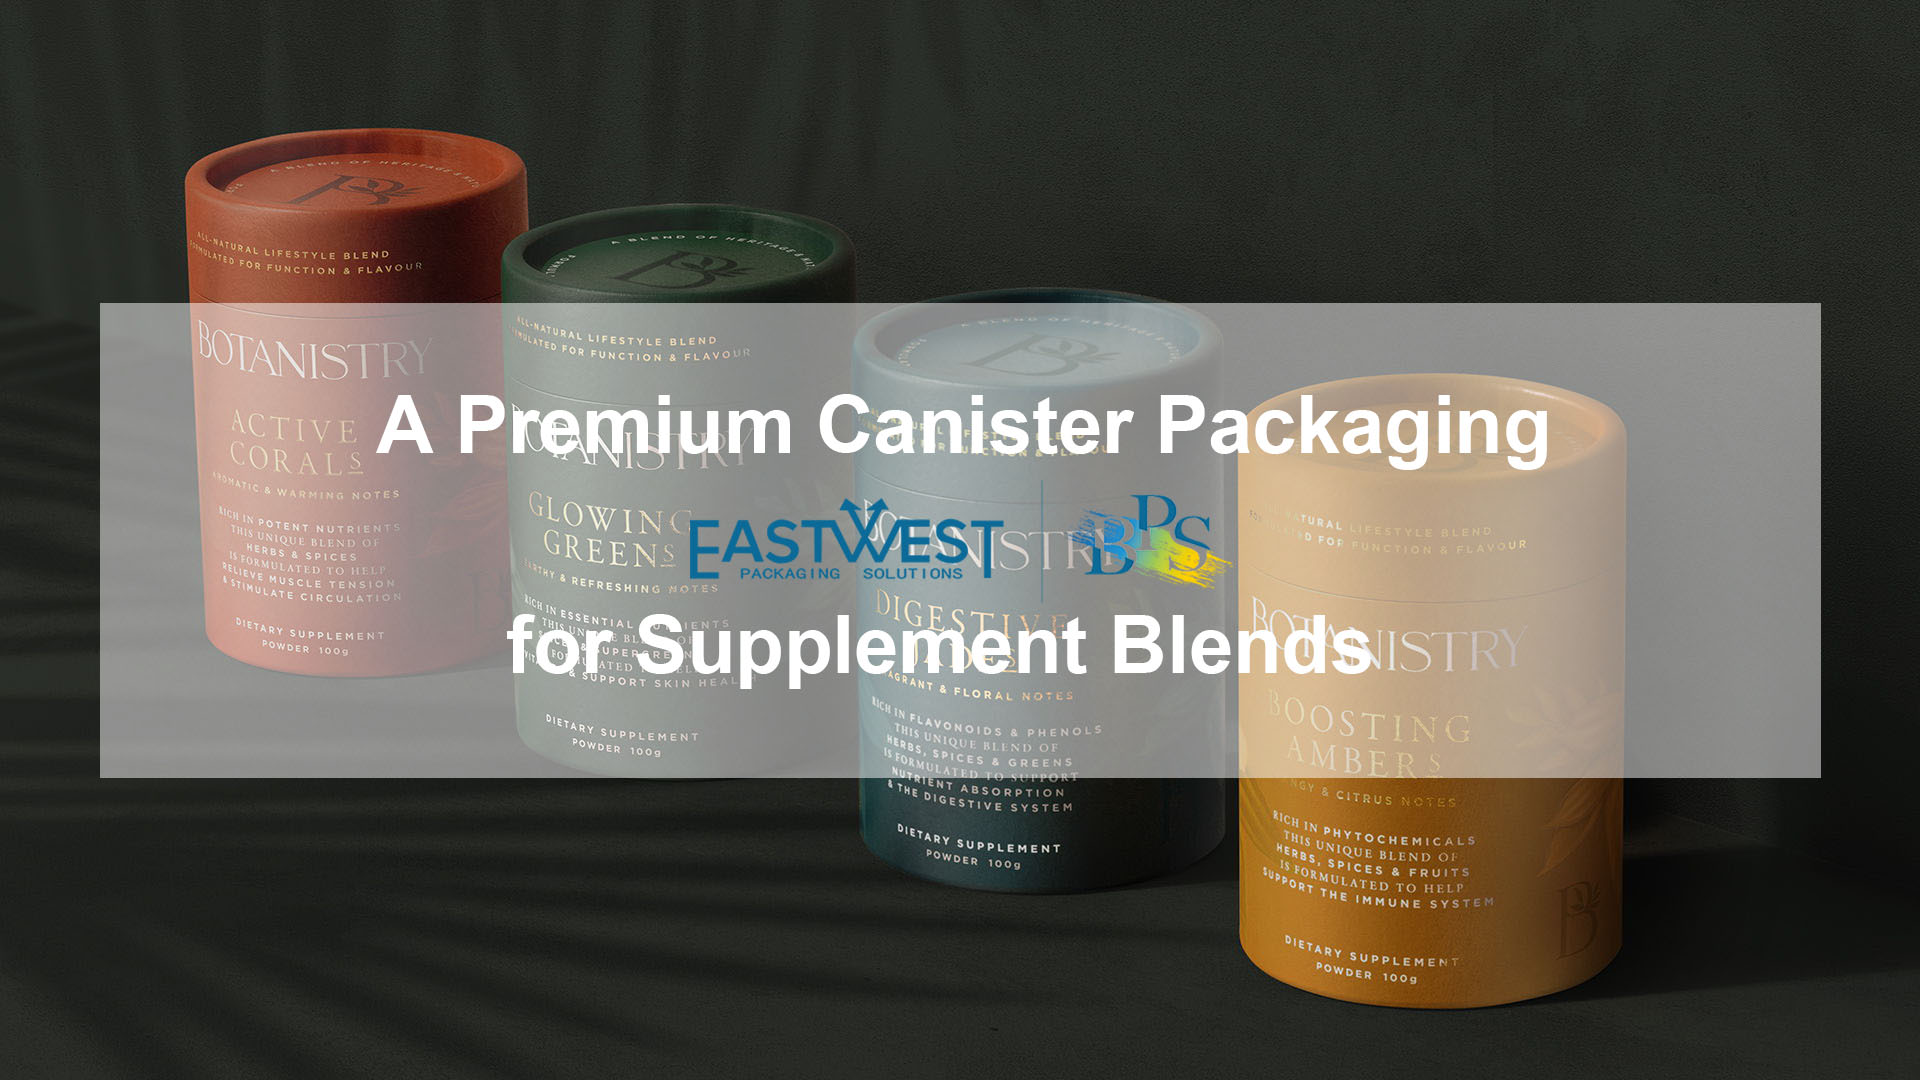 A Premium Canister Packaging for Supplement Blends